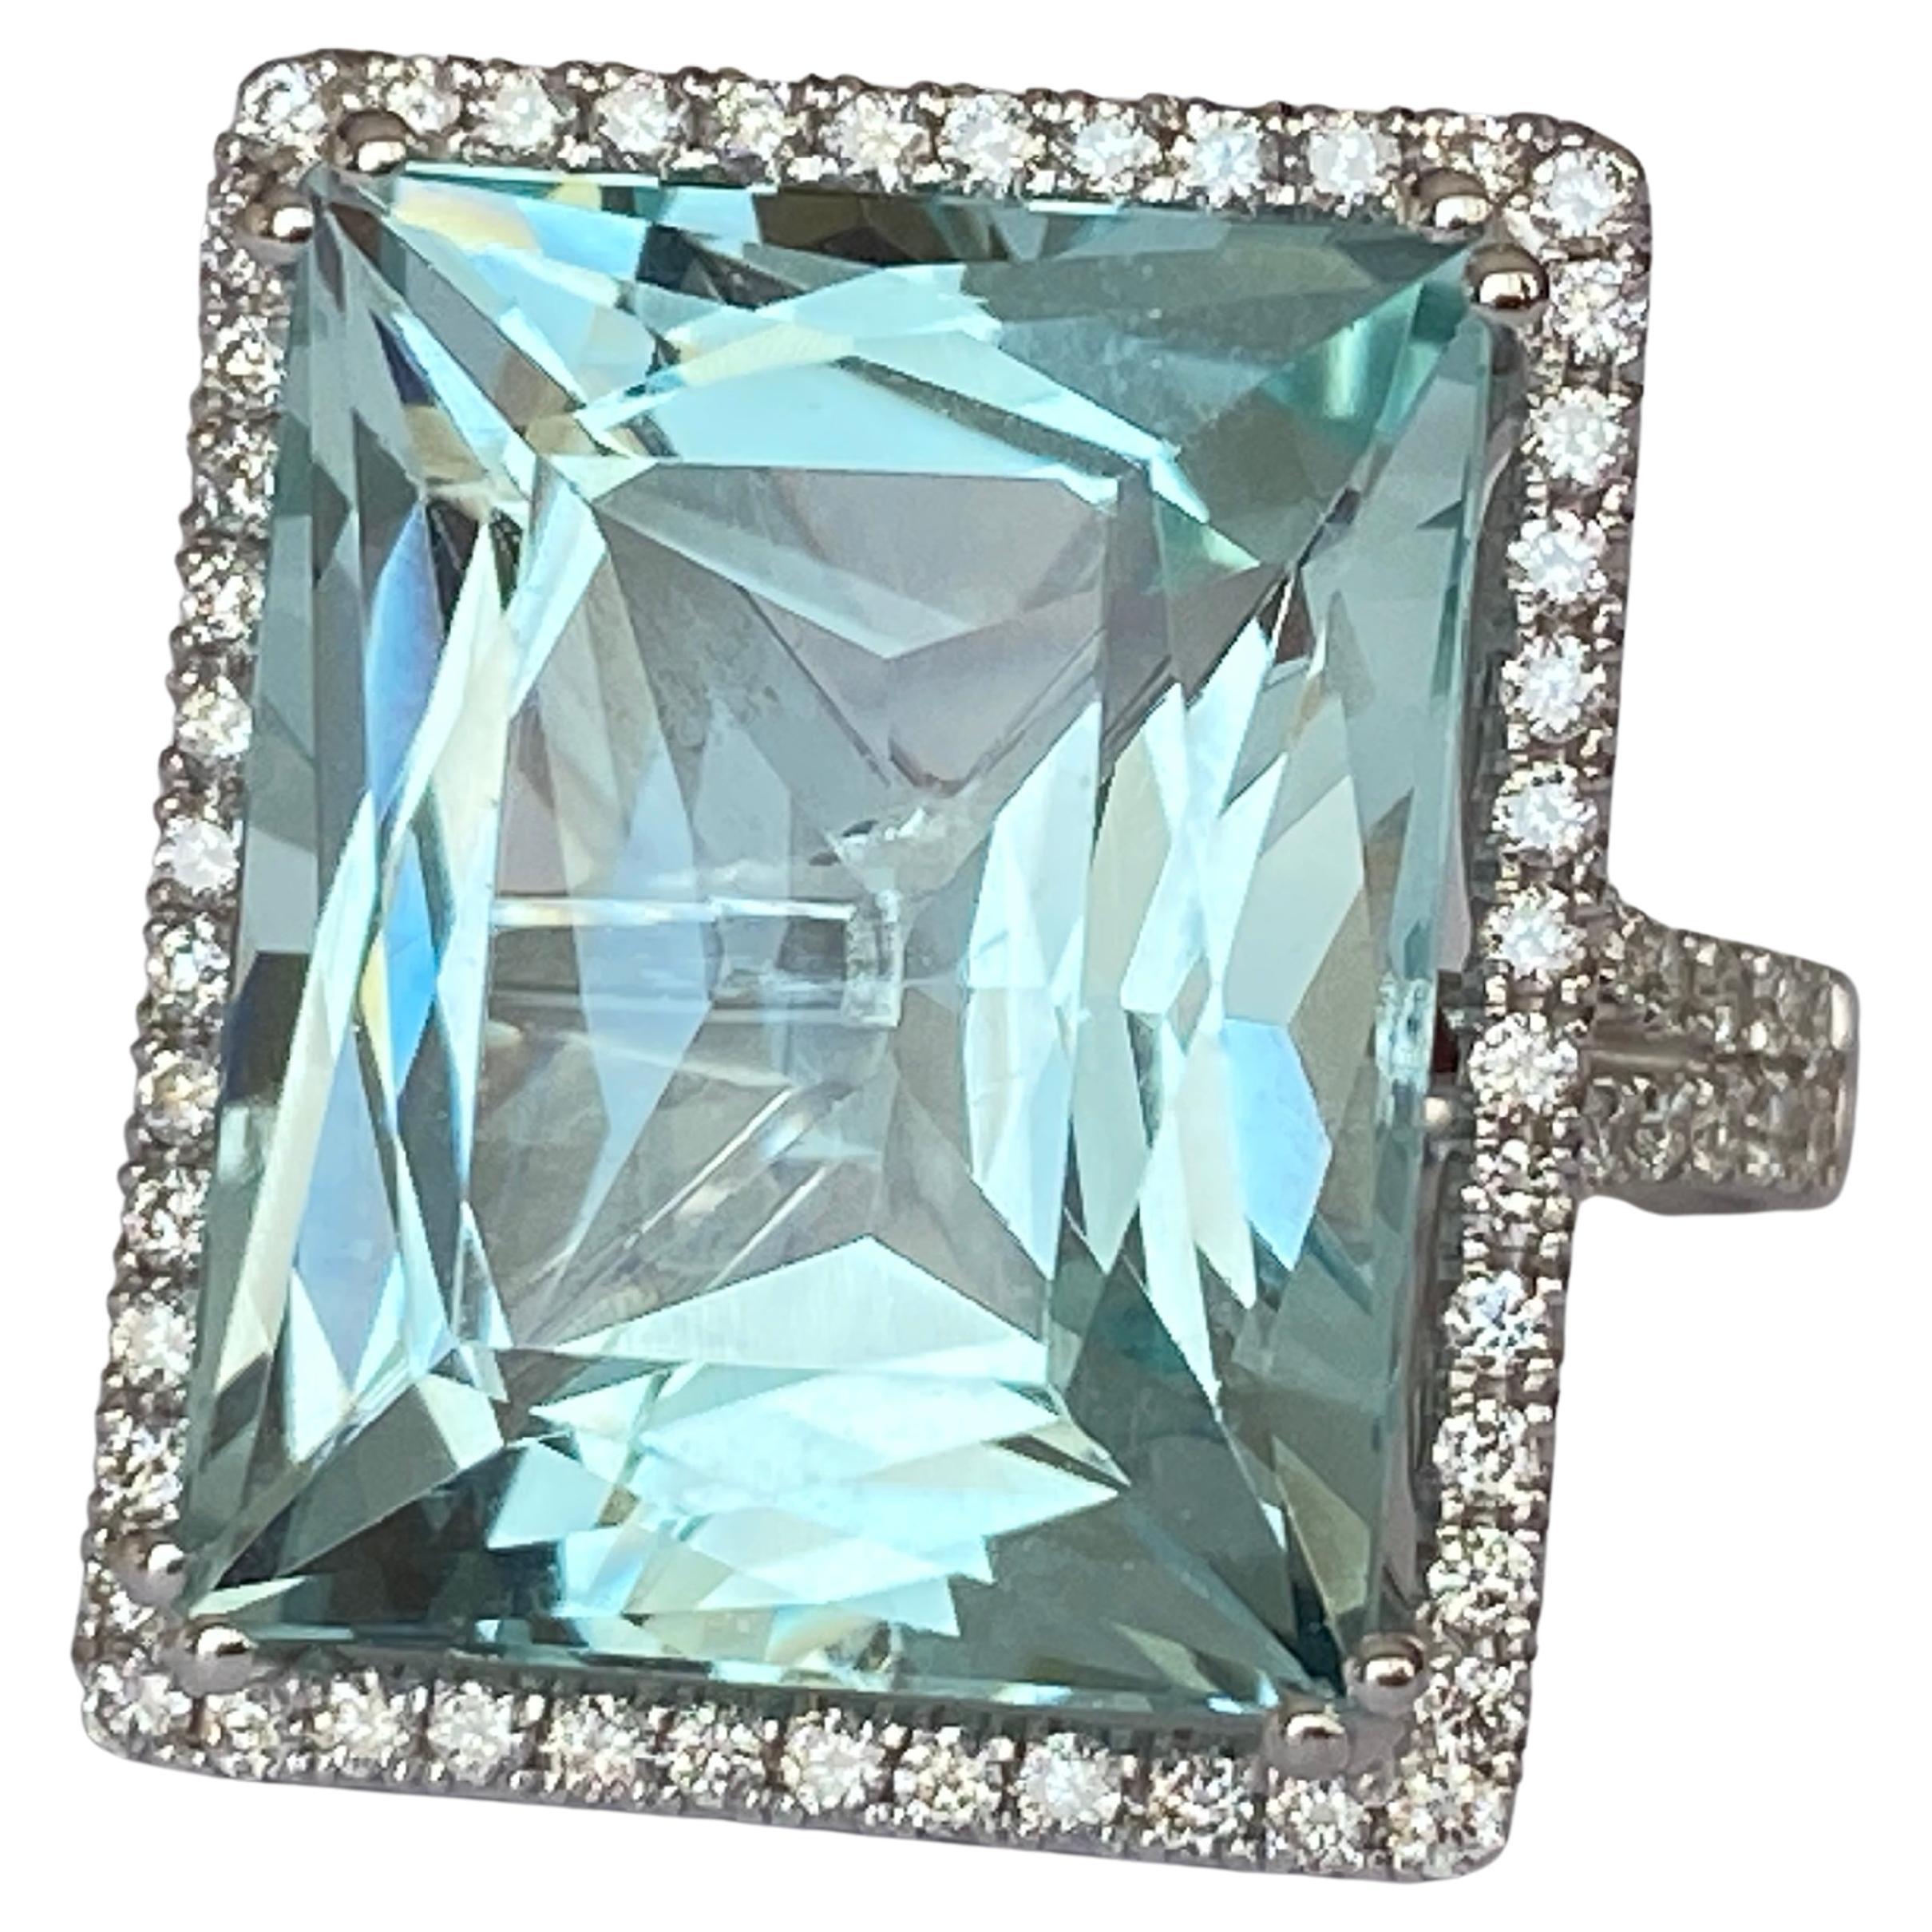 Exclusive handmade ring in 18 kt white gold set with rectangle cut aquamarine of approx. 18.00 carats! and decorated with 88 pieces of brilliant cut diamonds. Total diamonds: 1.00 ct E/F/G/VS/P1. Few stones are of Pique quality. ALGT certificate is